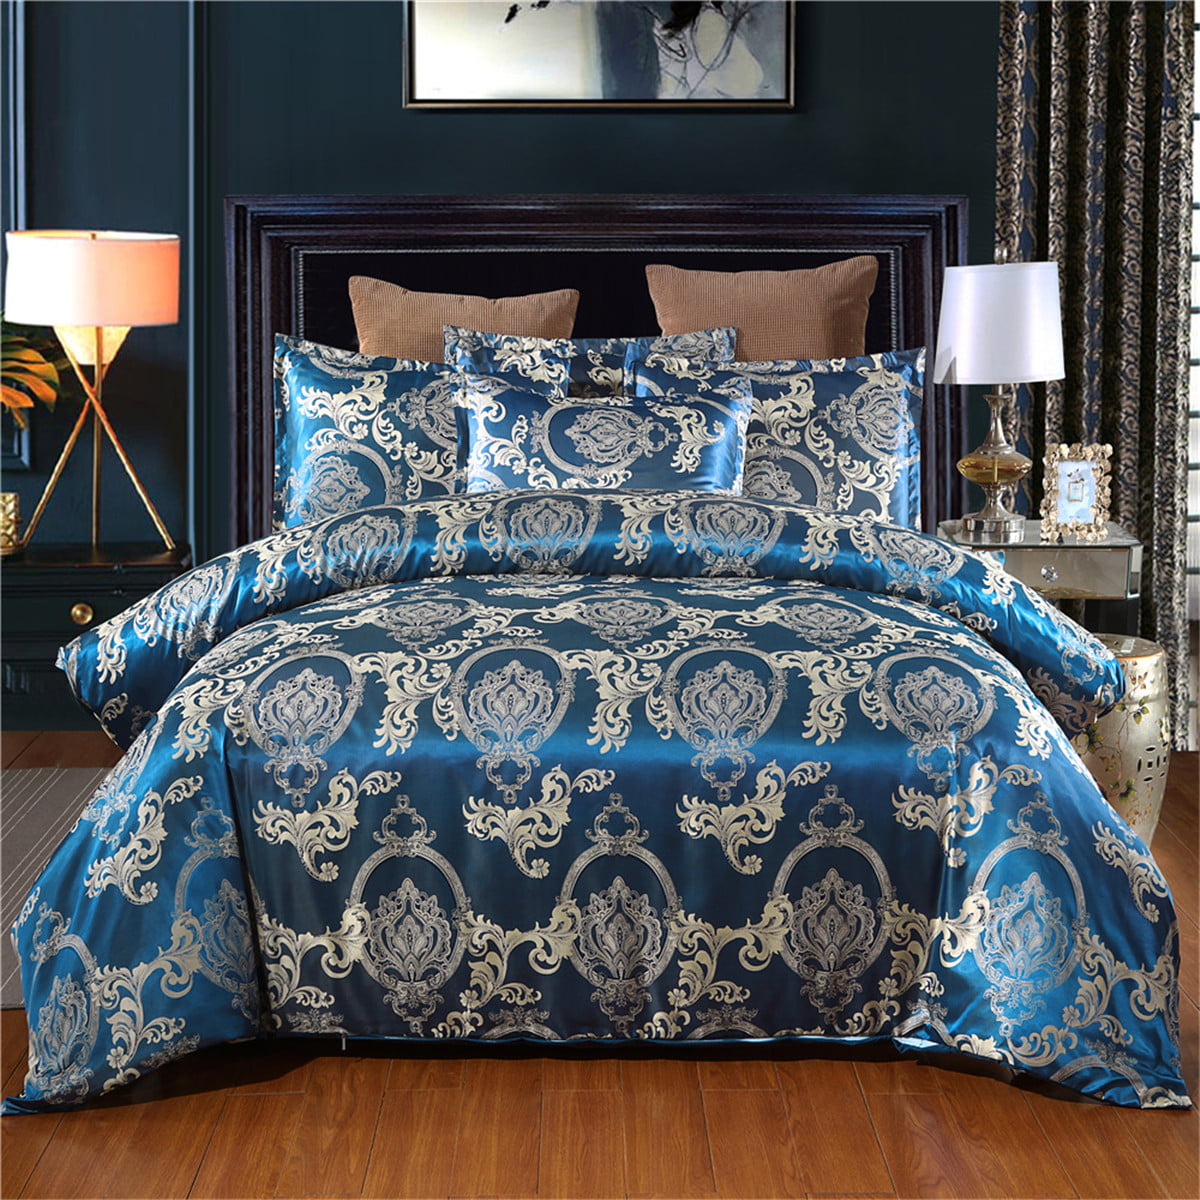 Satin Jacquard Quilted Bedspread Throw 3 Piece Bedding Set Double & King Size 